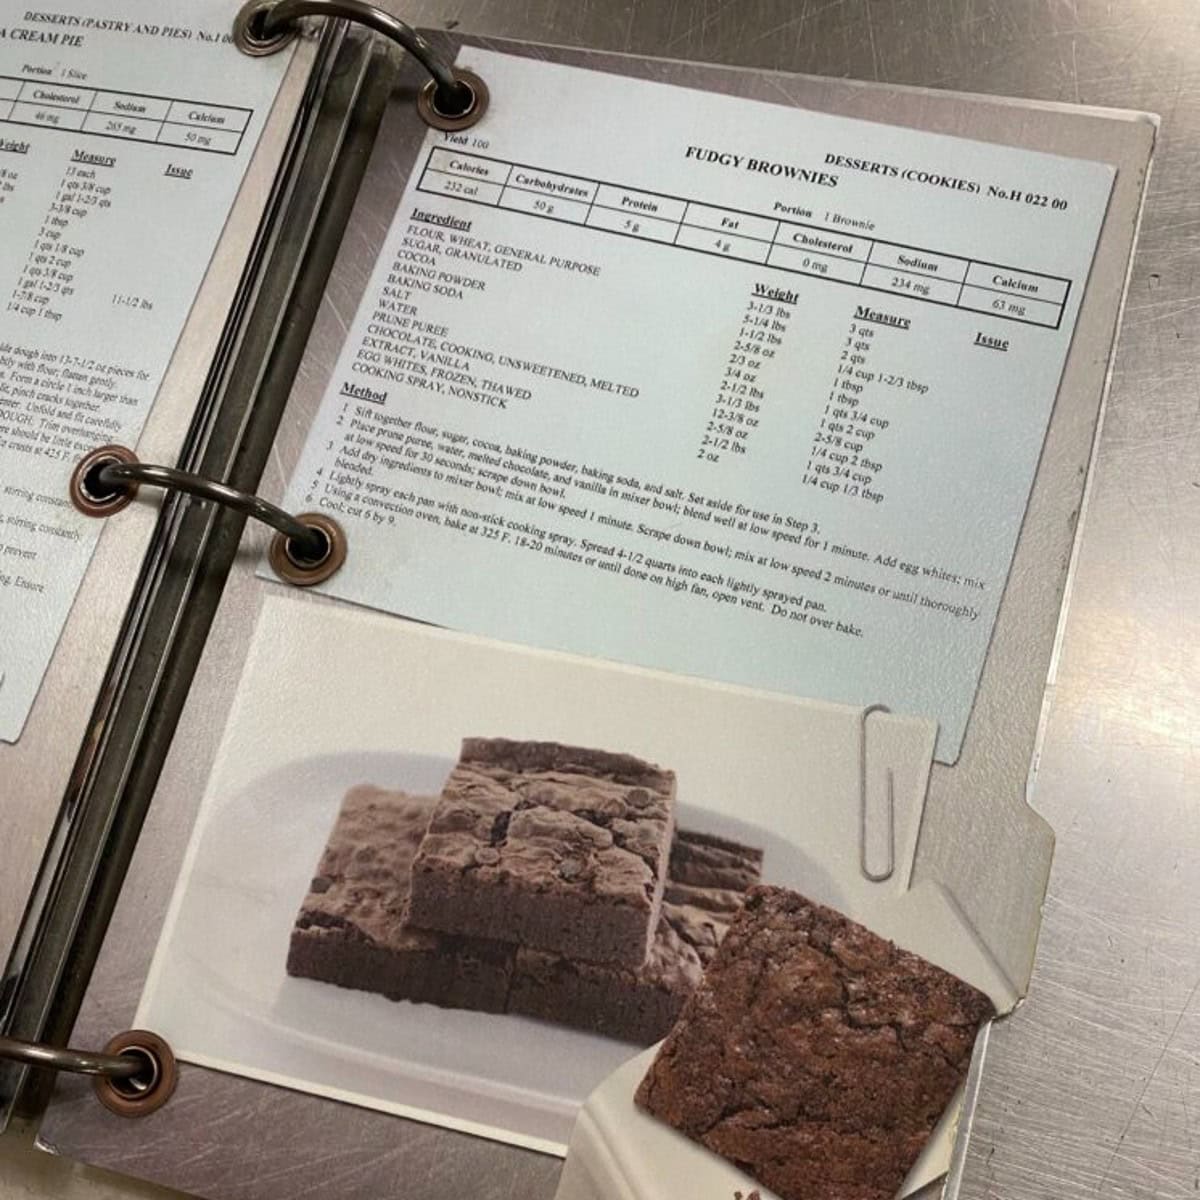 a picture of a cookbook on the uss midway with a photo of fudgy prune brownies